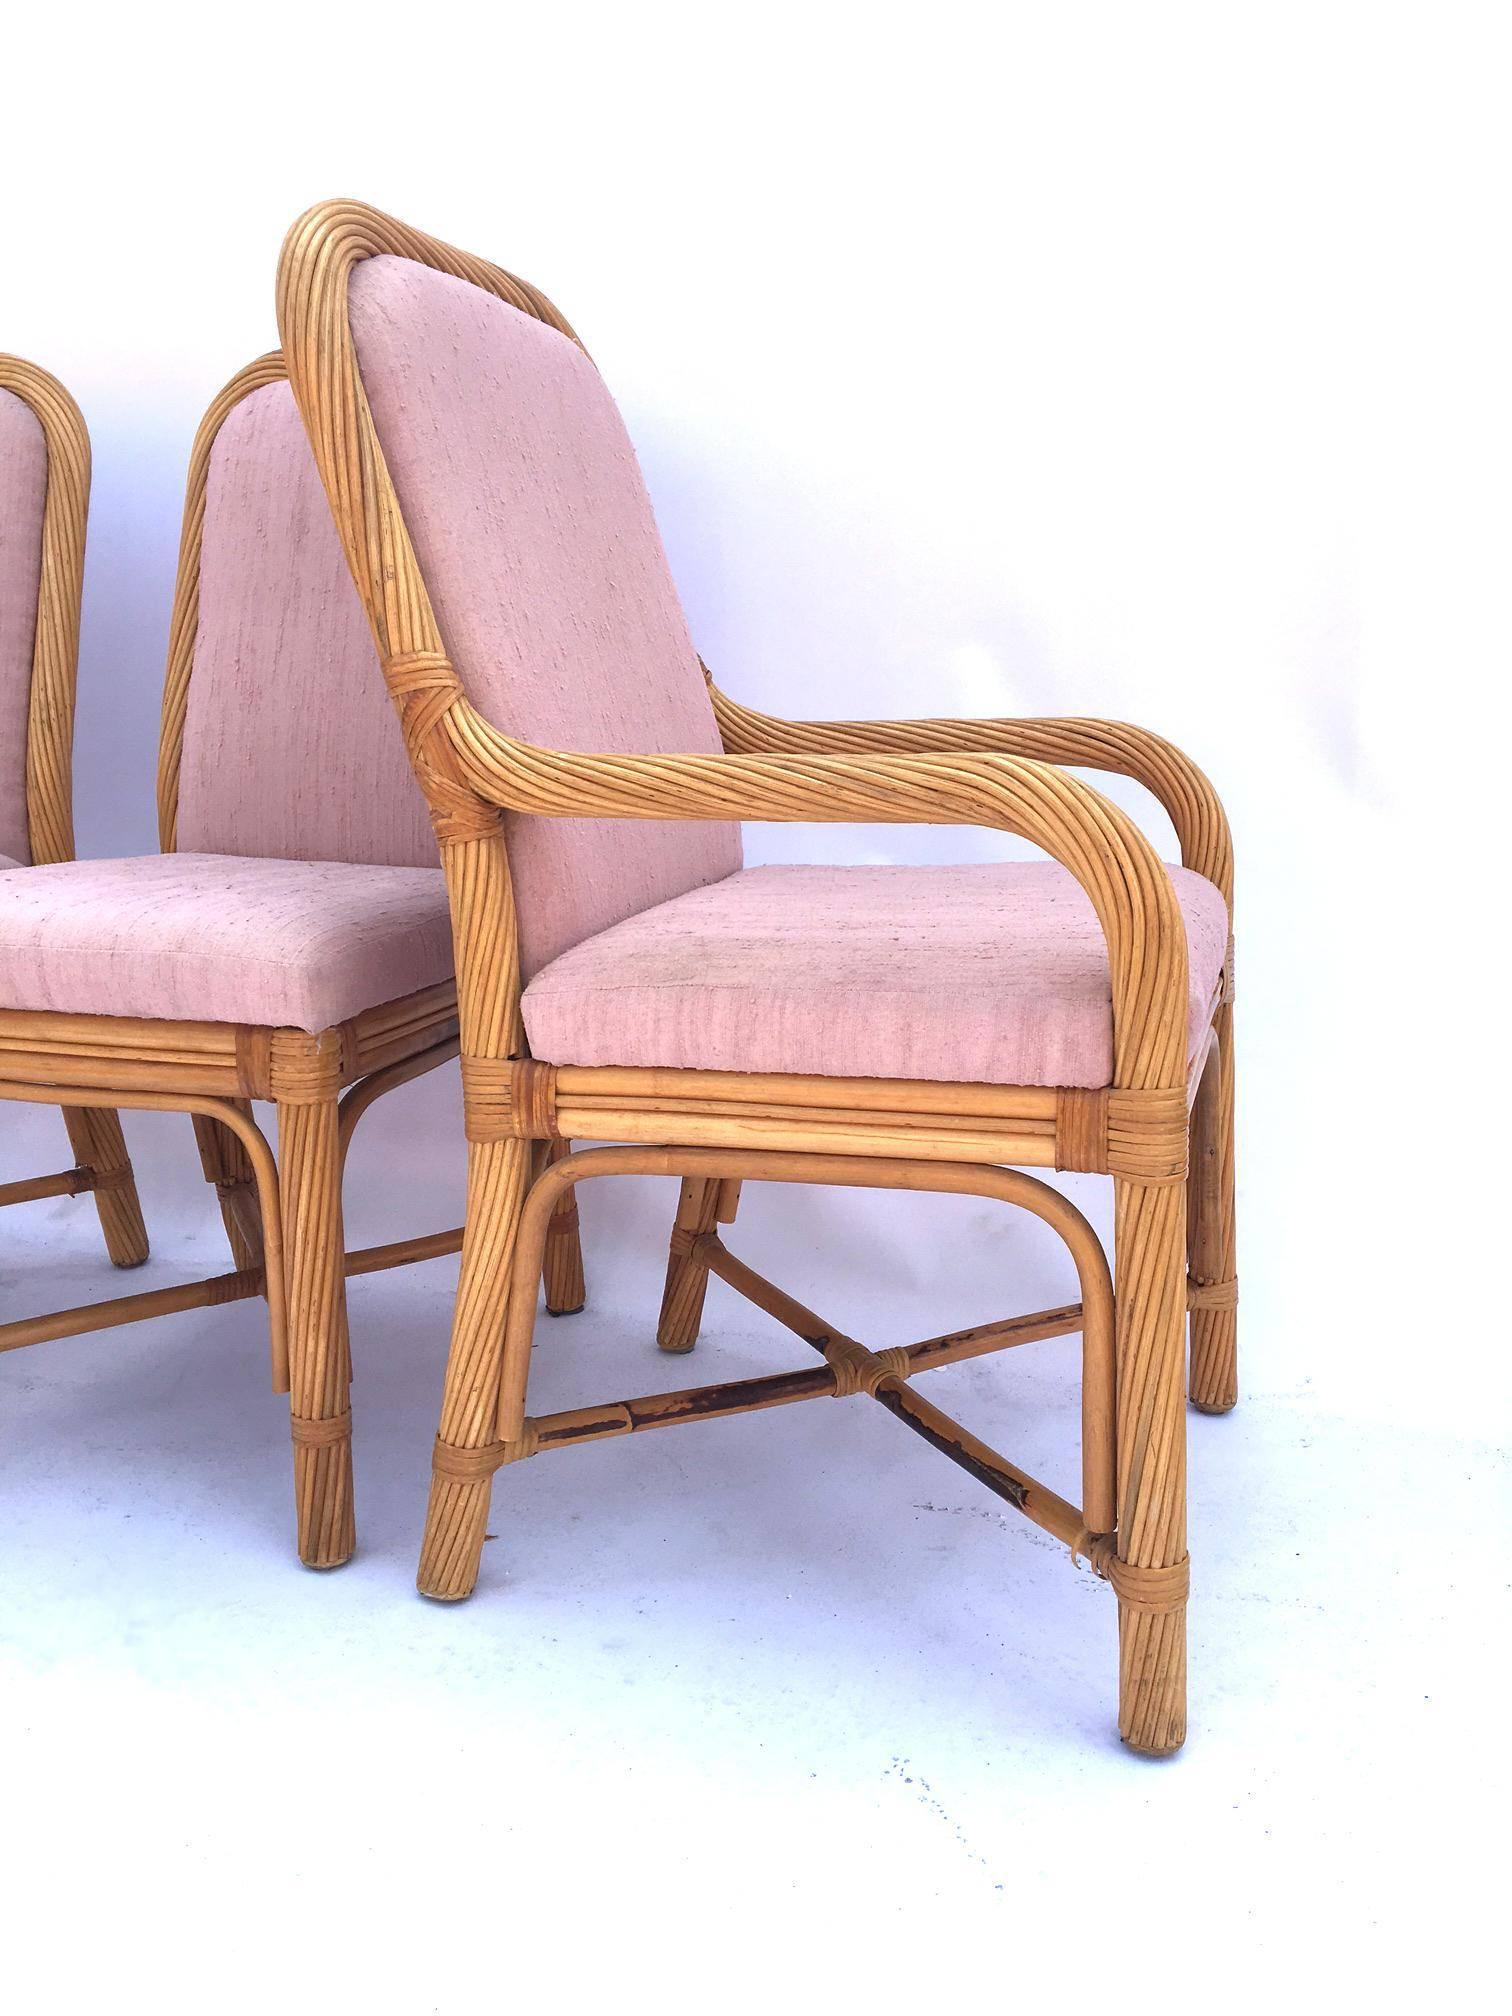 Set of six twisted rattan dining chairs, two armchairs and four standard. Bent rattan with muted pink upholstery. 

Good vintage condition with minor wear to upholstery. 

Armchairs measure 22.5 wide, 26 deep, and 39.5 tall. Seat measures 17.5